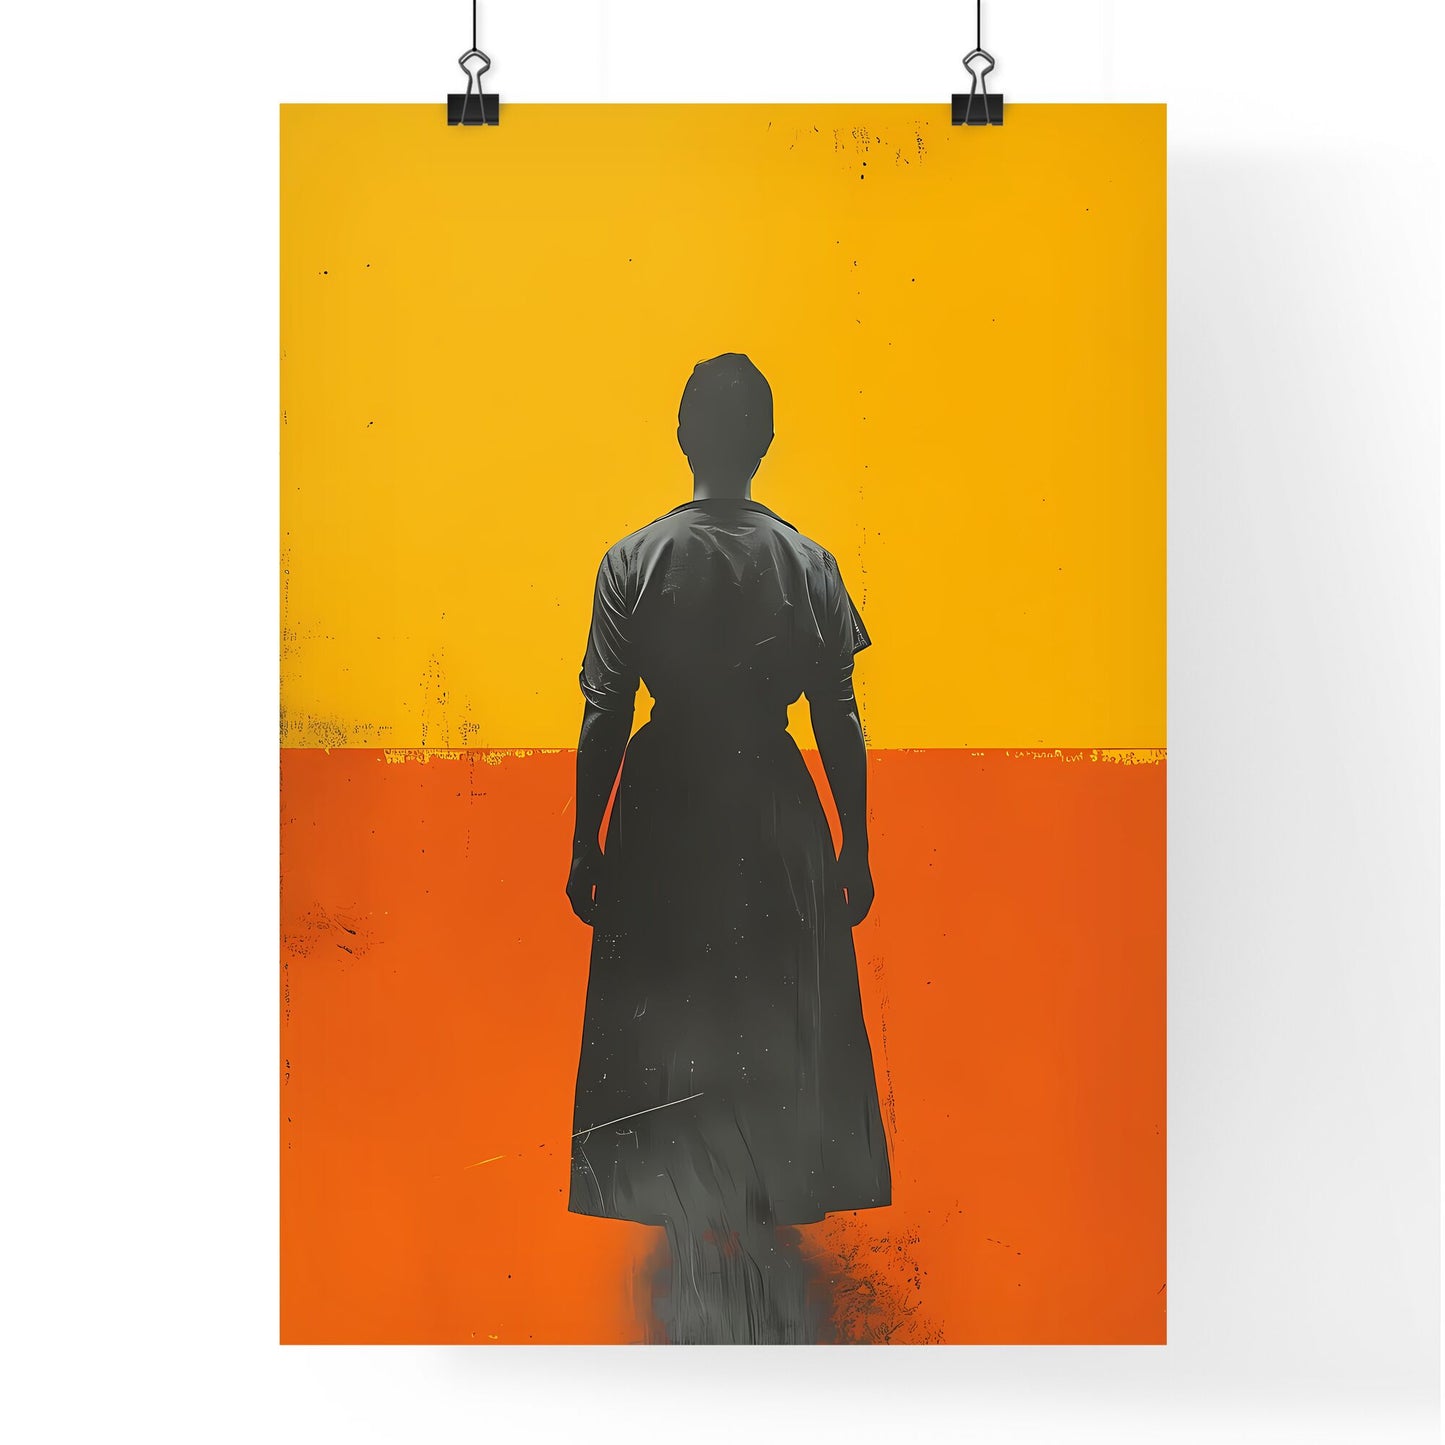 French maid - Art print of a person standing in front of a yellow and orange background Default Title